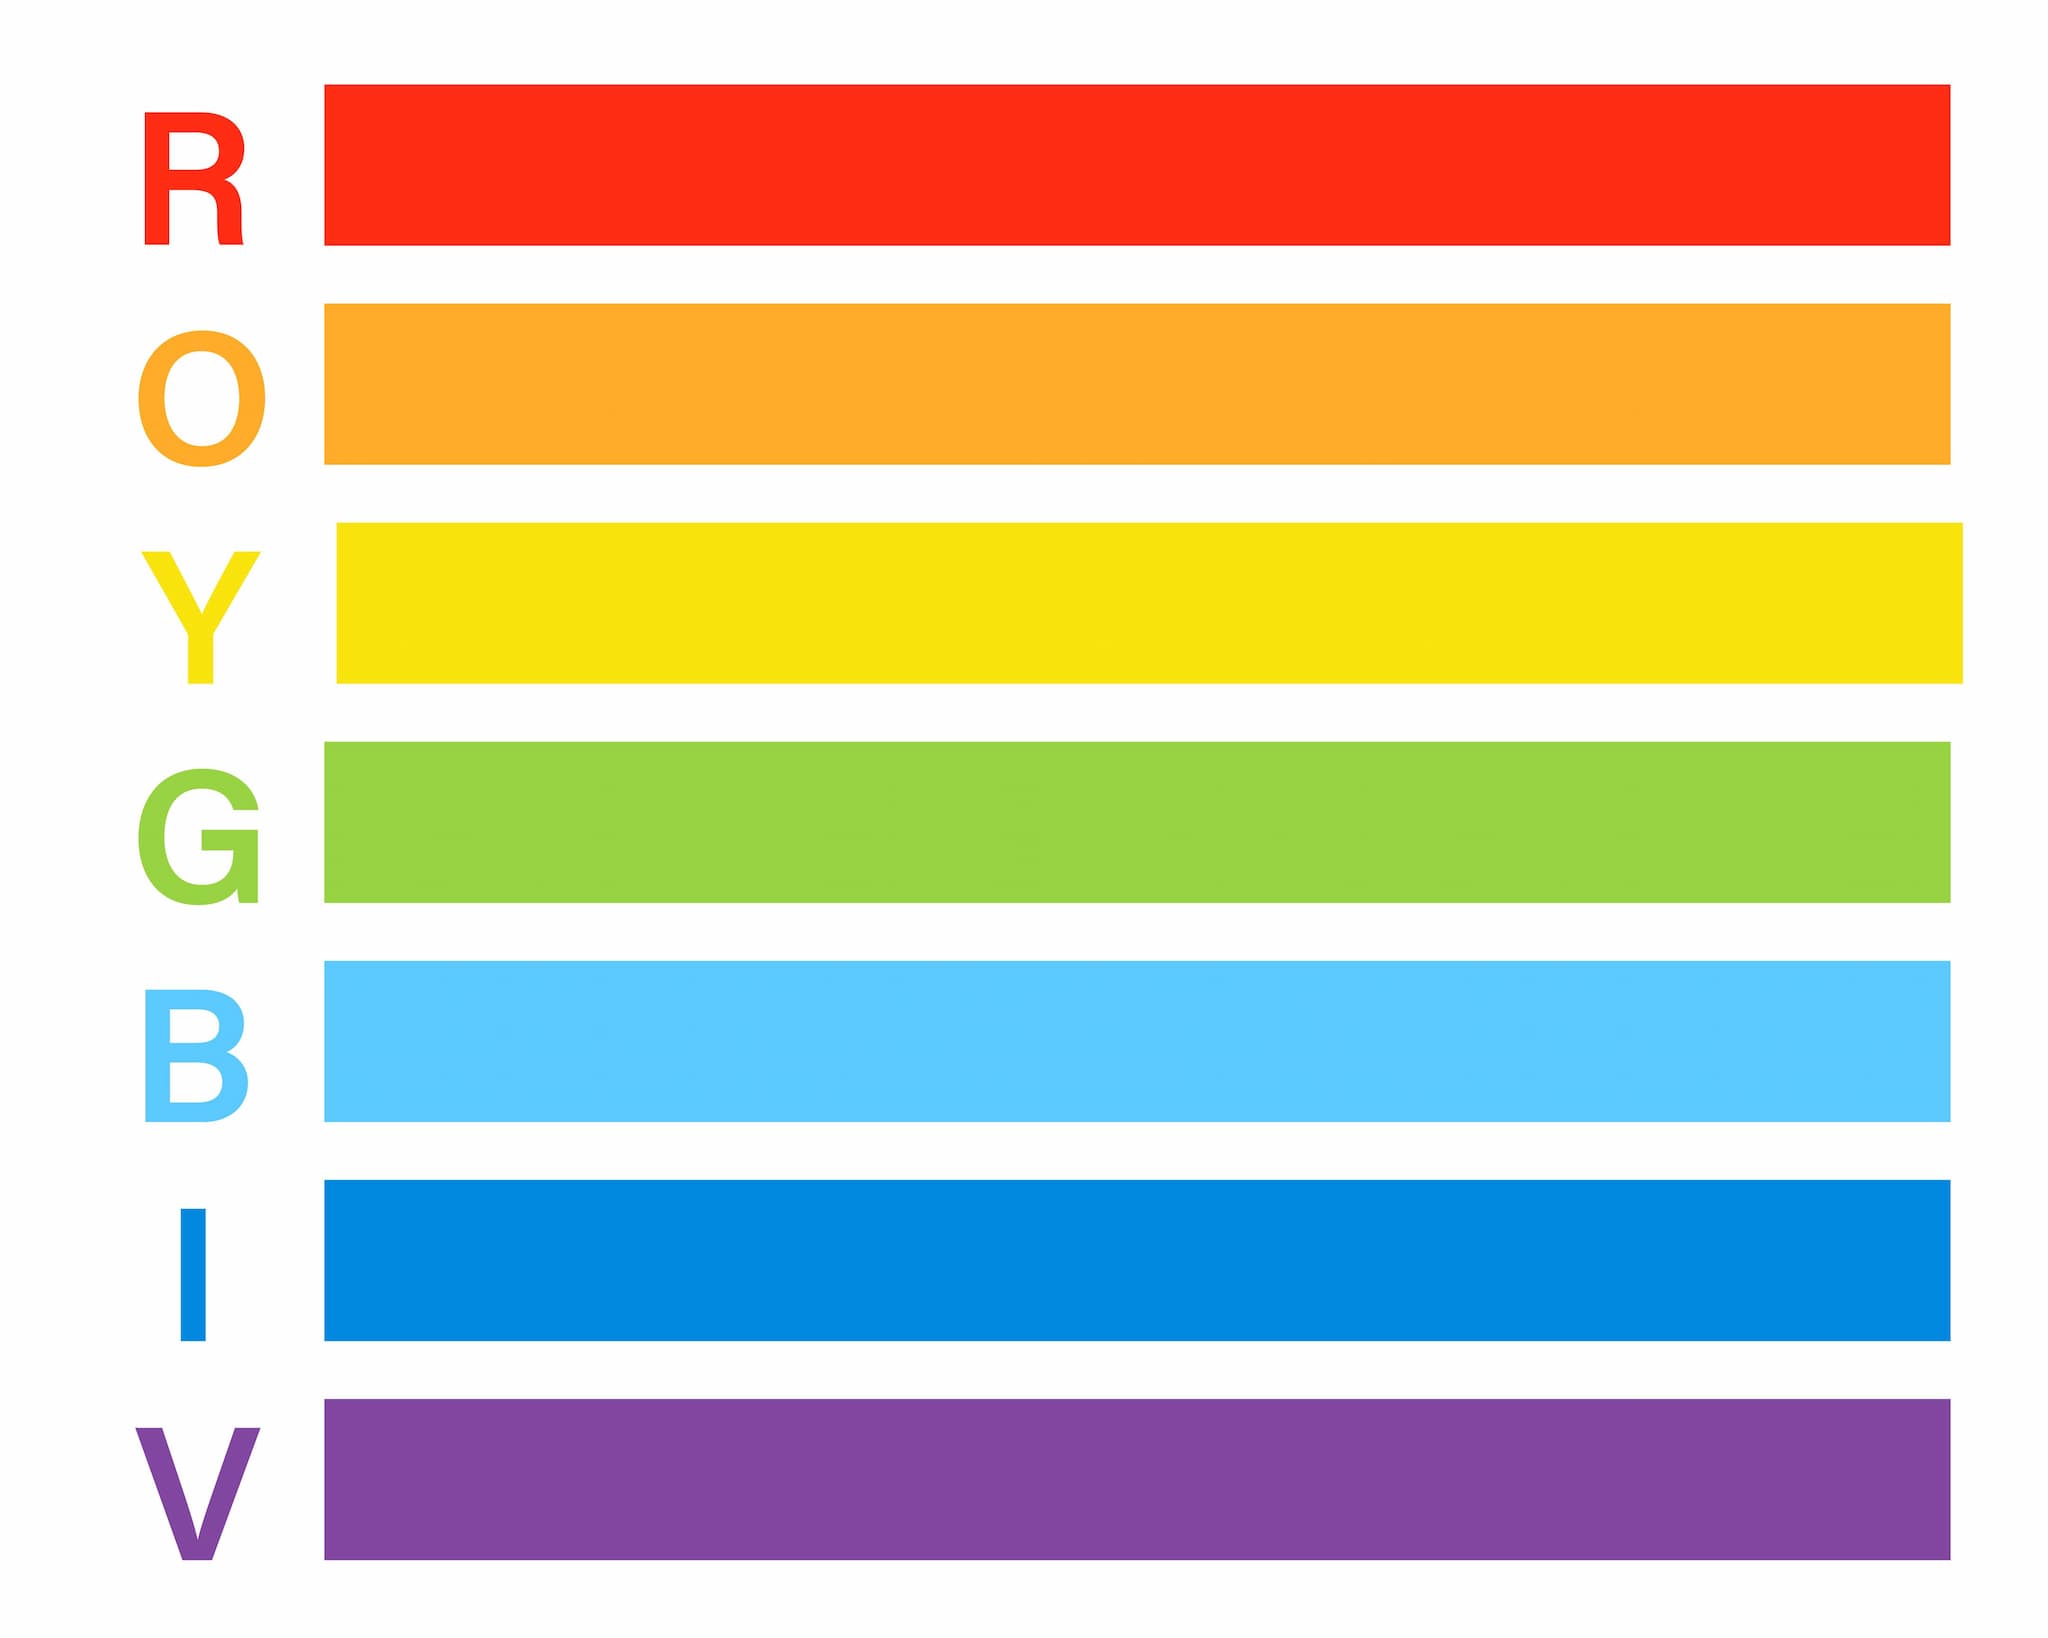 ROY G BIV stands for the order of colors in the rainbow